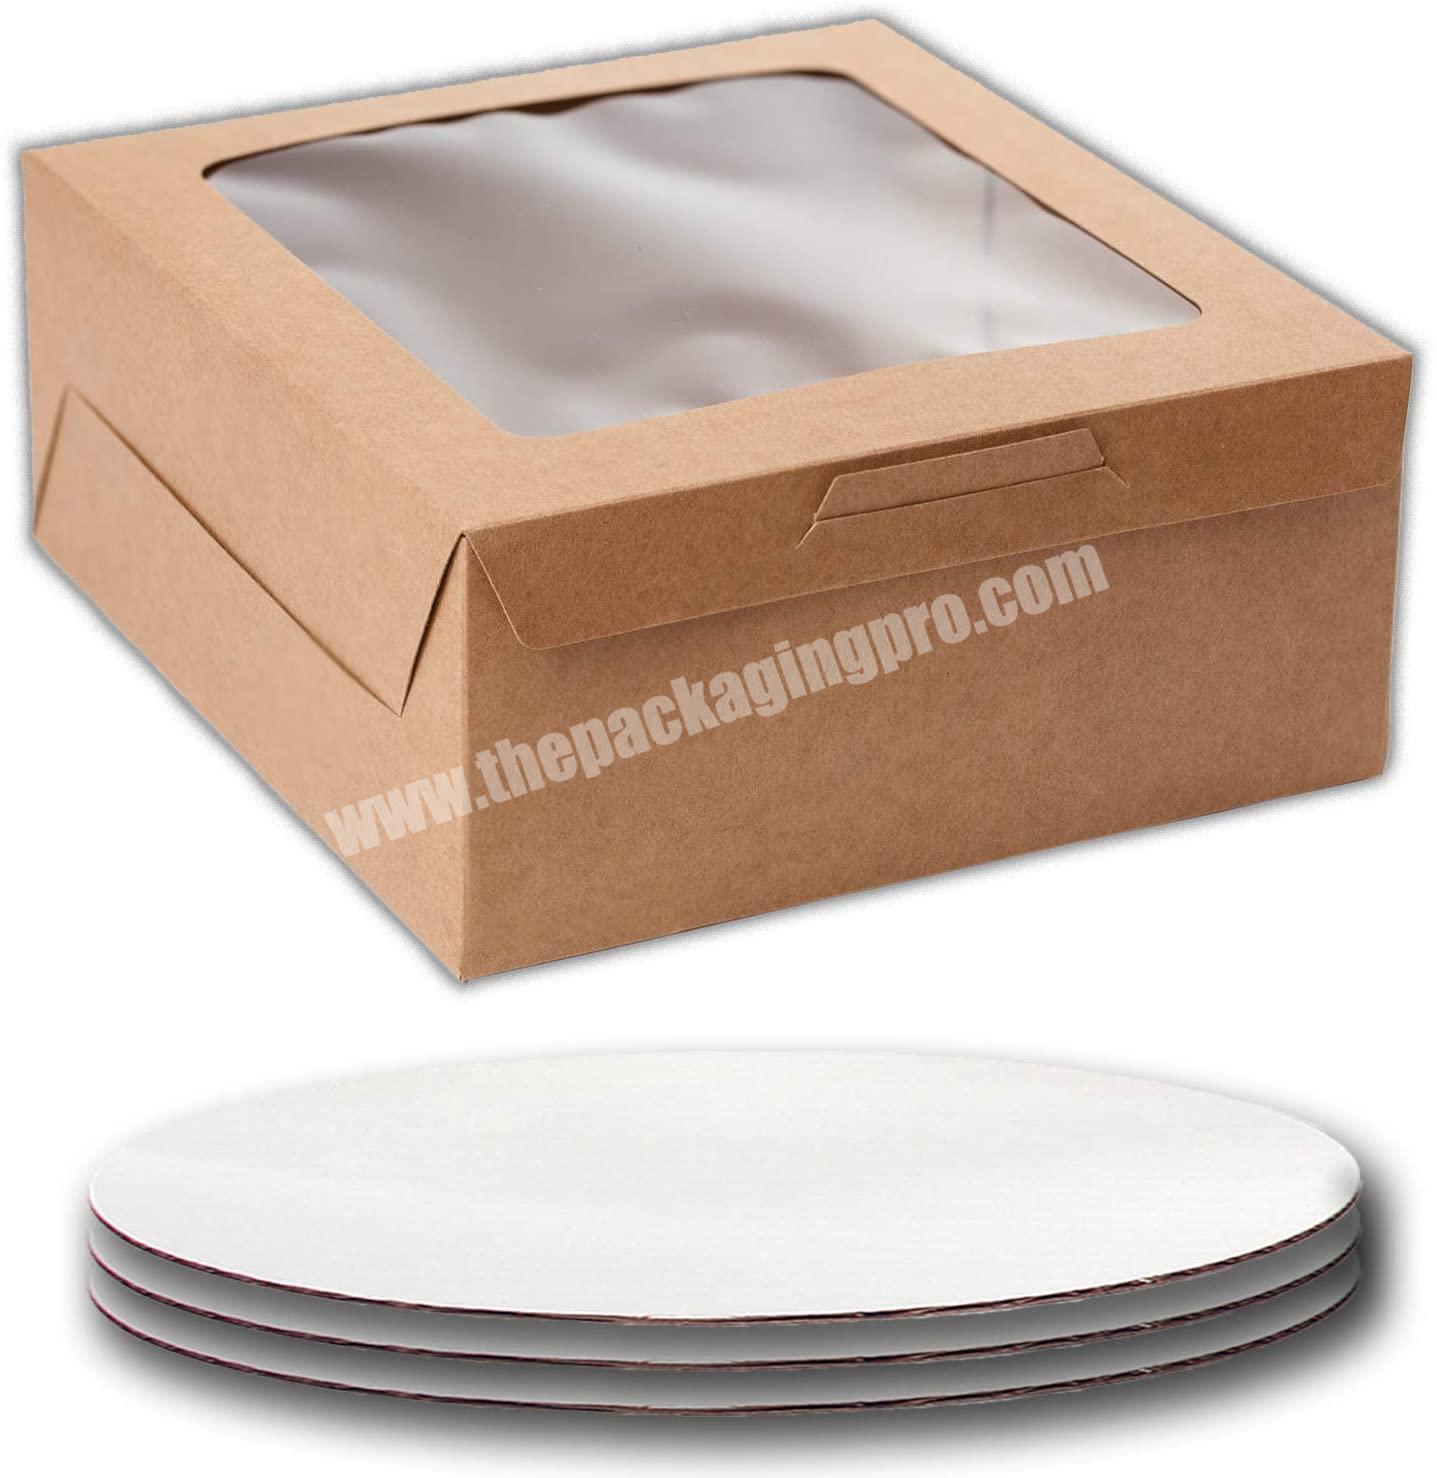 10 Inch Bakery Box Has a Clear Window Color Brown White Kraft Paper Round Cake Board Cake Boxes 10 x 10 x 5